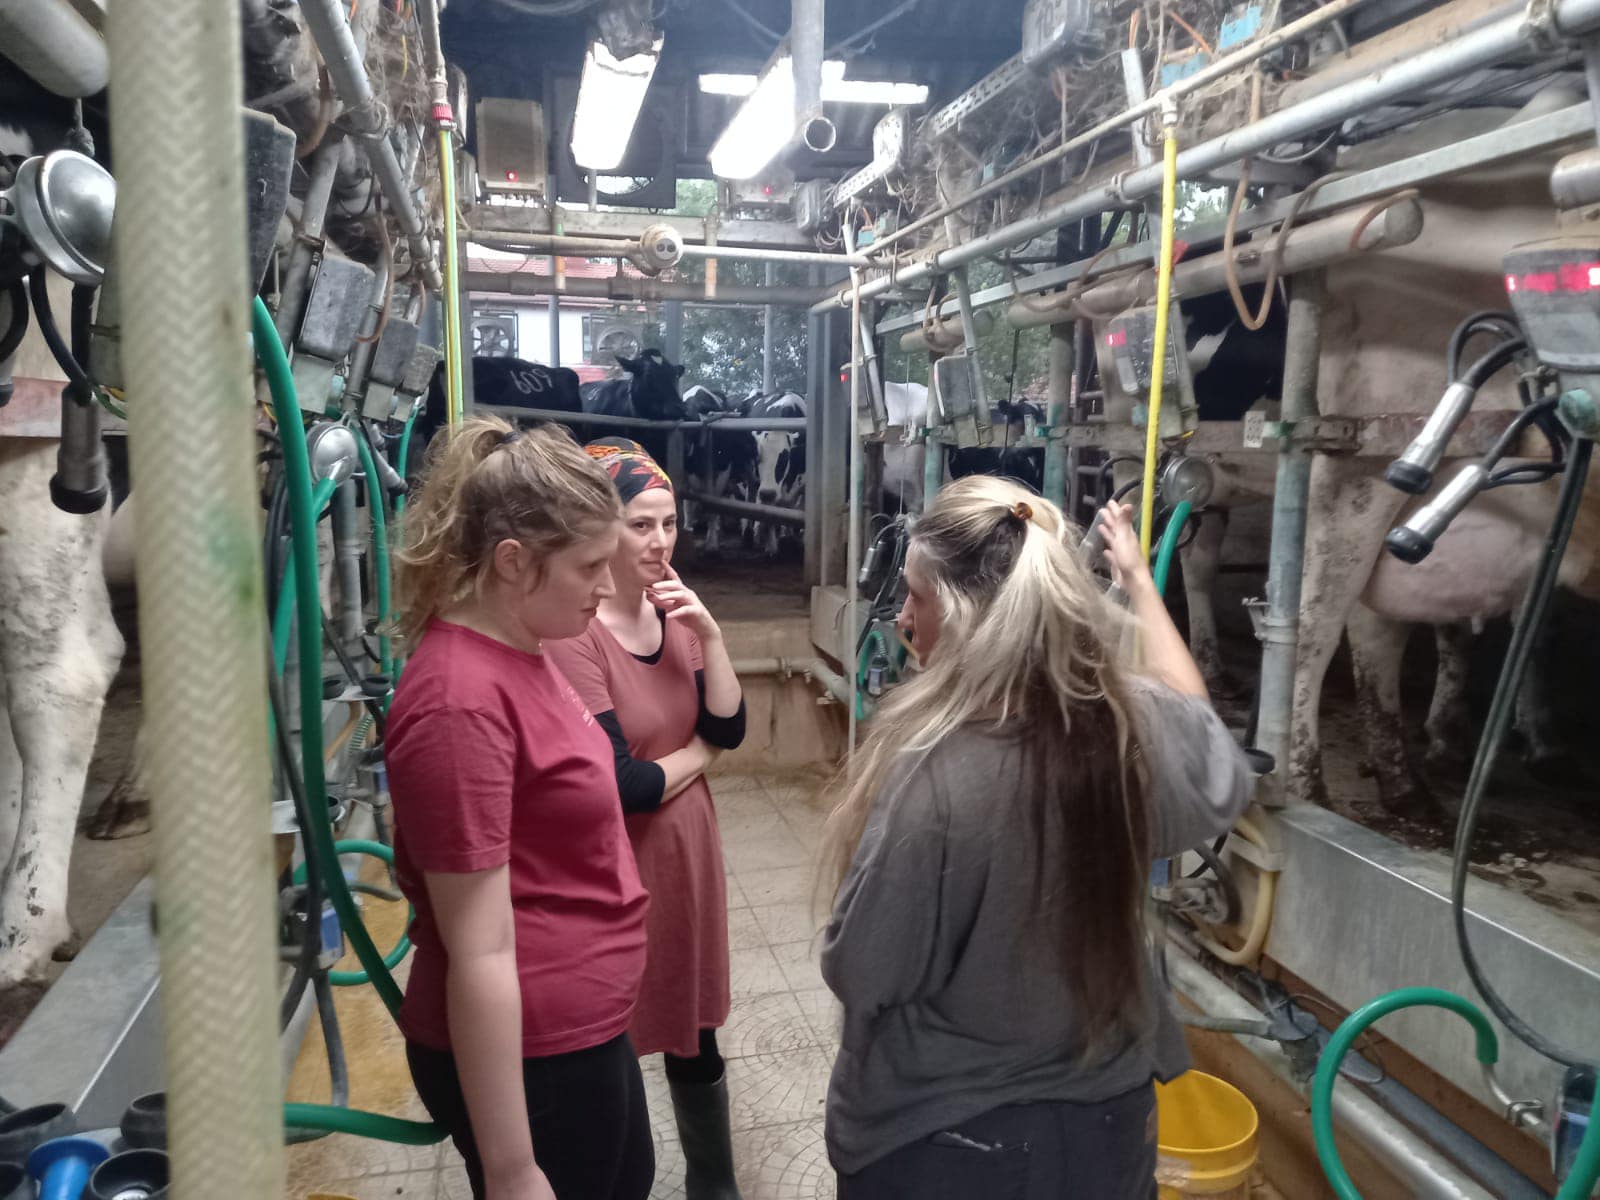 Sarit Yoker and her partner Sivan Lacker training volunteers to milk cows. &quot;People come in who have no clue what they’re doing. The training makes it tangible&quot; (Photo: Private album).